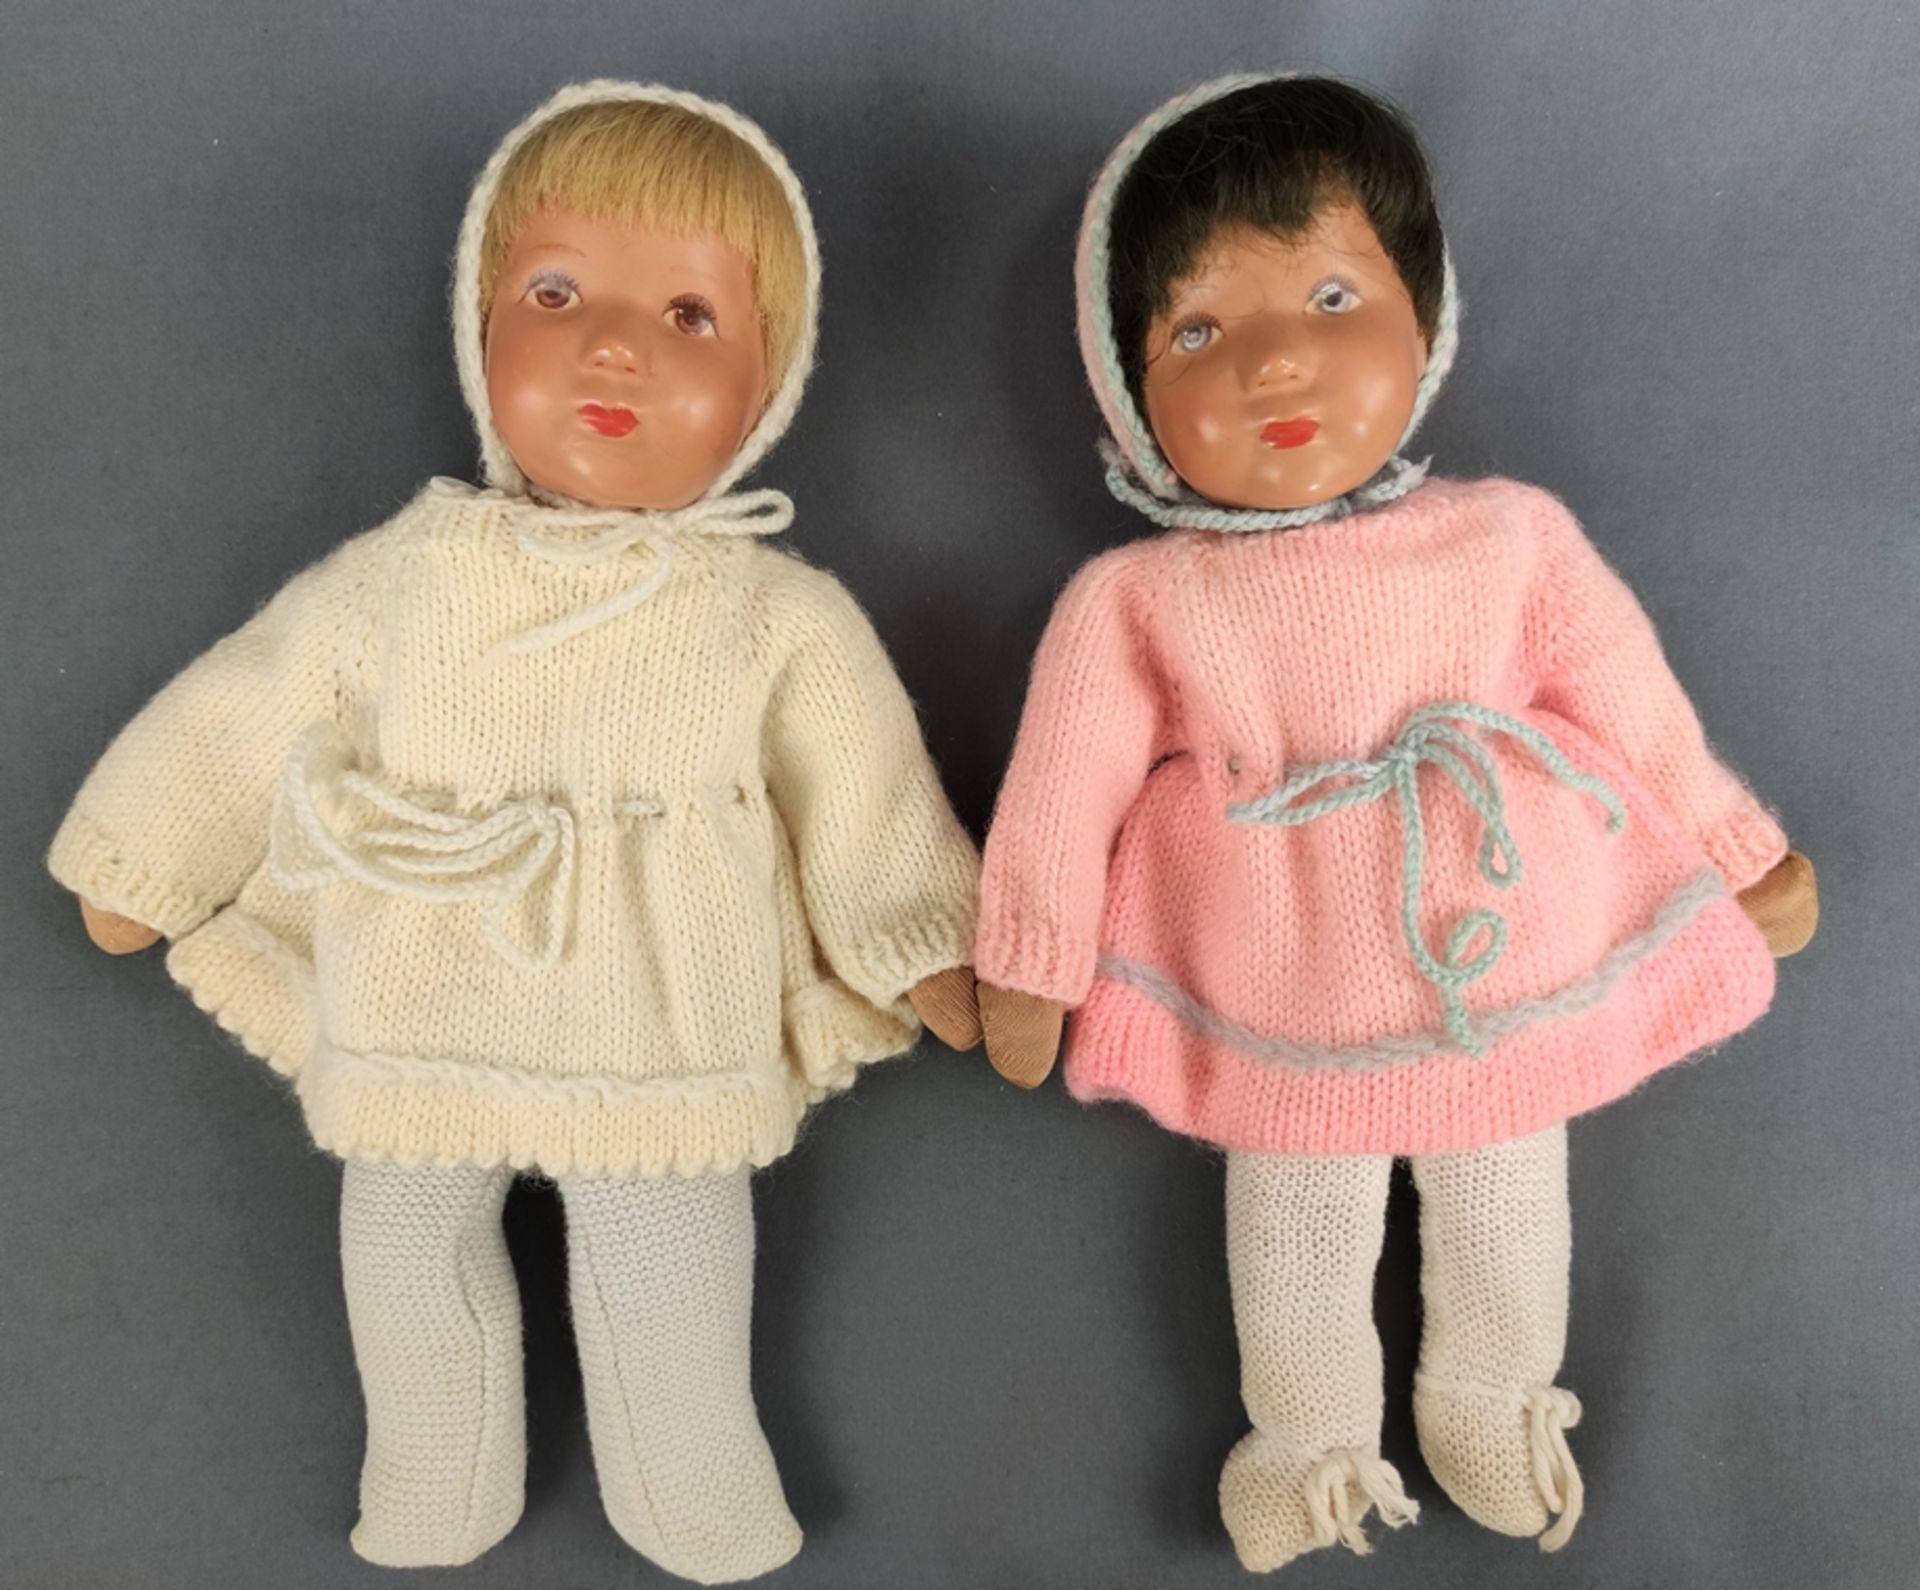 Two small dolls, cloth body with wire, filled, plastic heads finely painted, one real hair wig in b